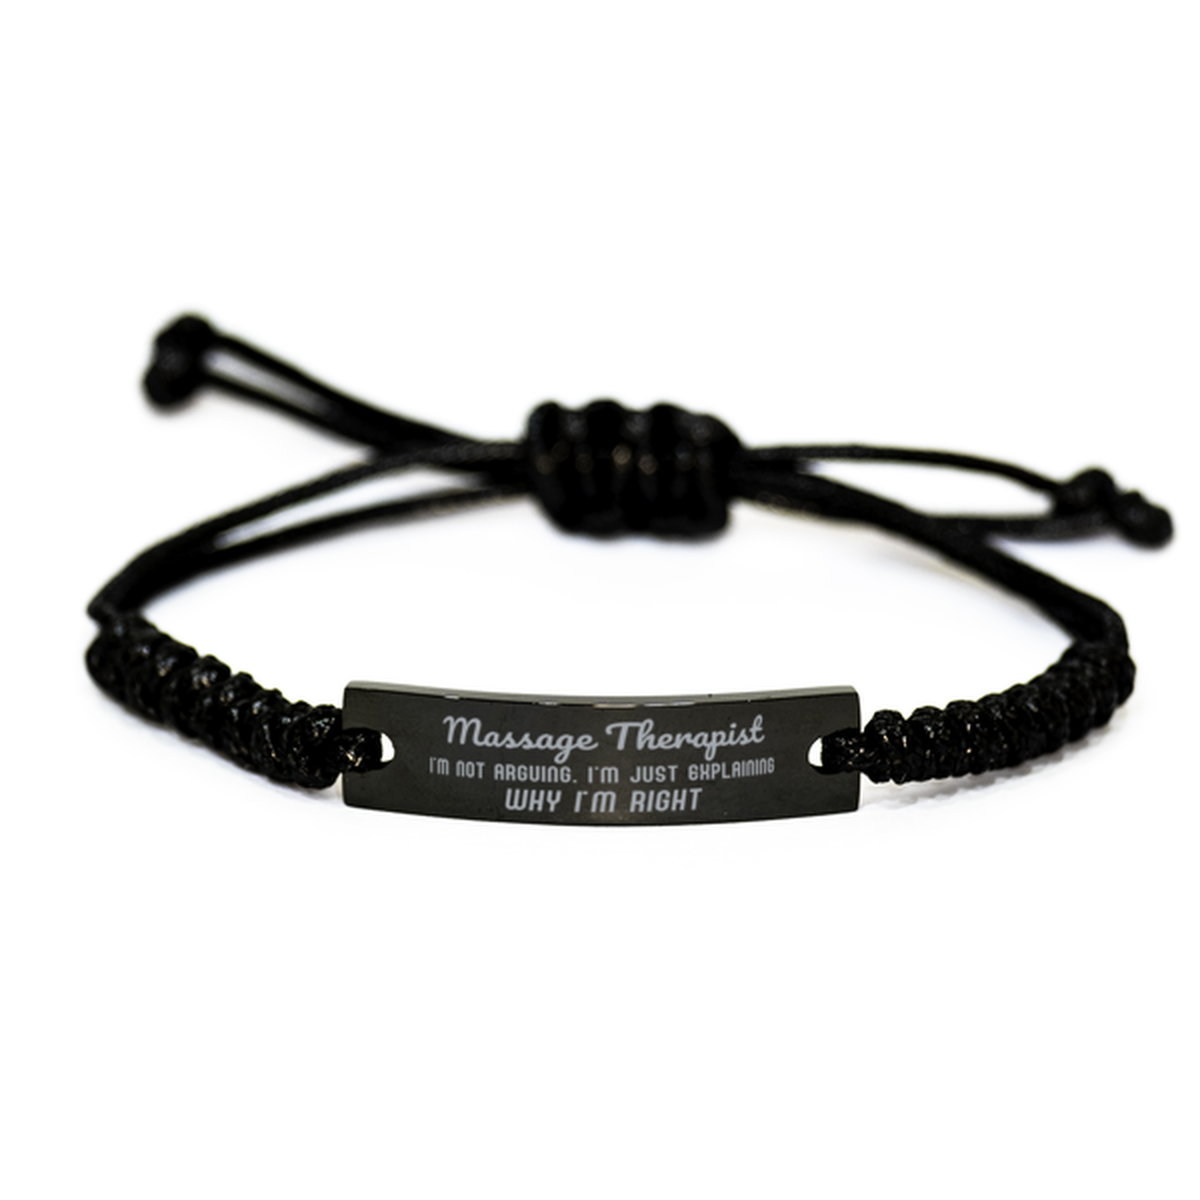 Massage Therapist I'm not Arguing. I'm Just Explaining Why I'm RIGHT Black Rope Bracelet, Funny Saying Quote Massage Therapist Gifts For Massage Therapist Graduation Birthday Christmas Gifts for Men Women Coworker